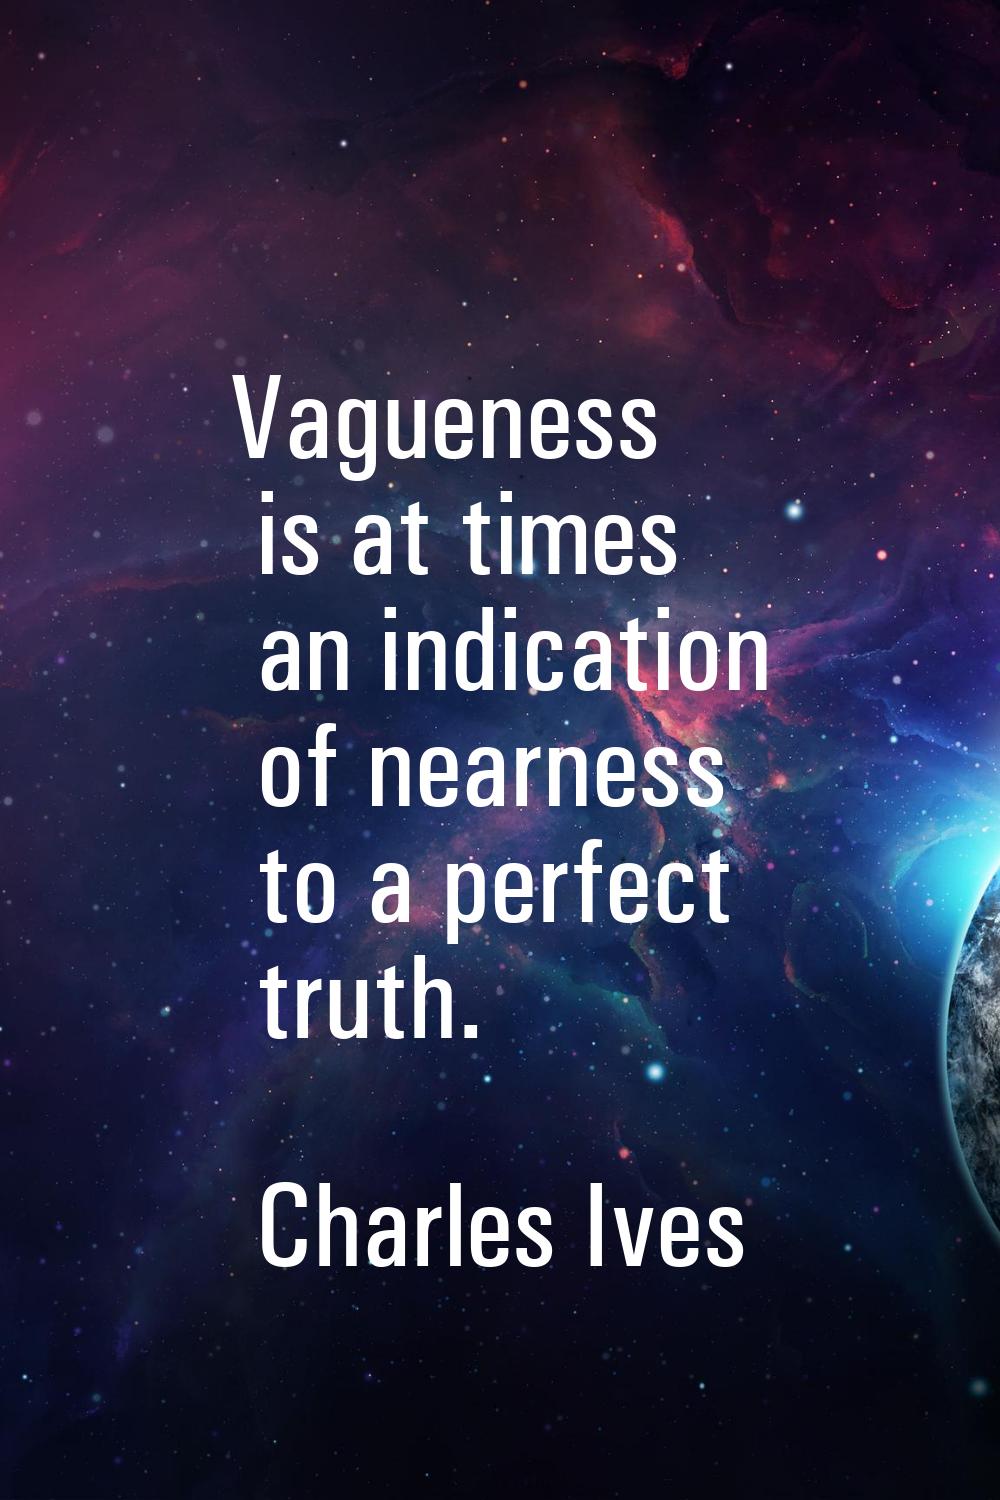 Vagueness is at times an indication of nearness to a perfect truth.